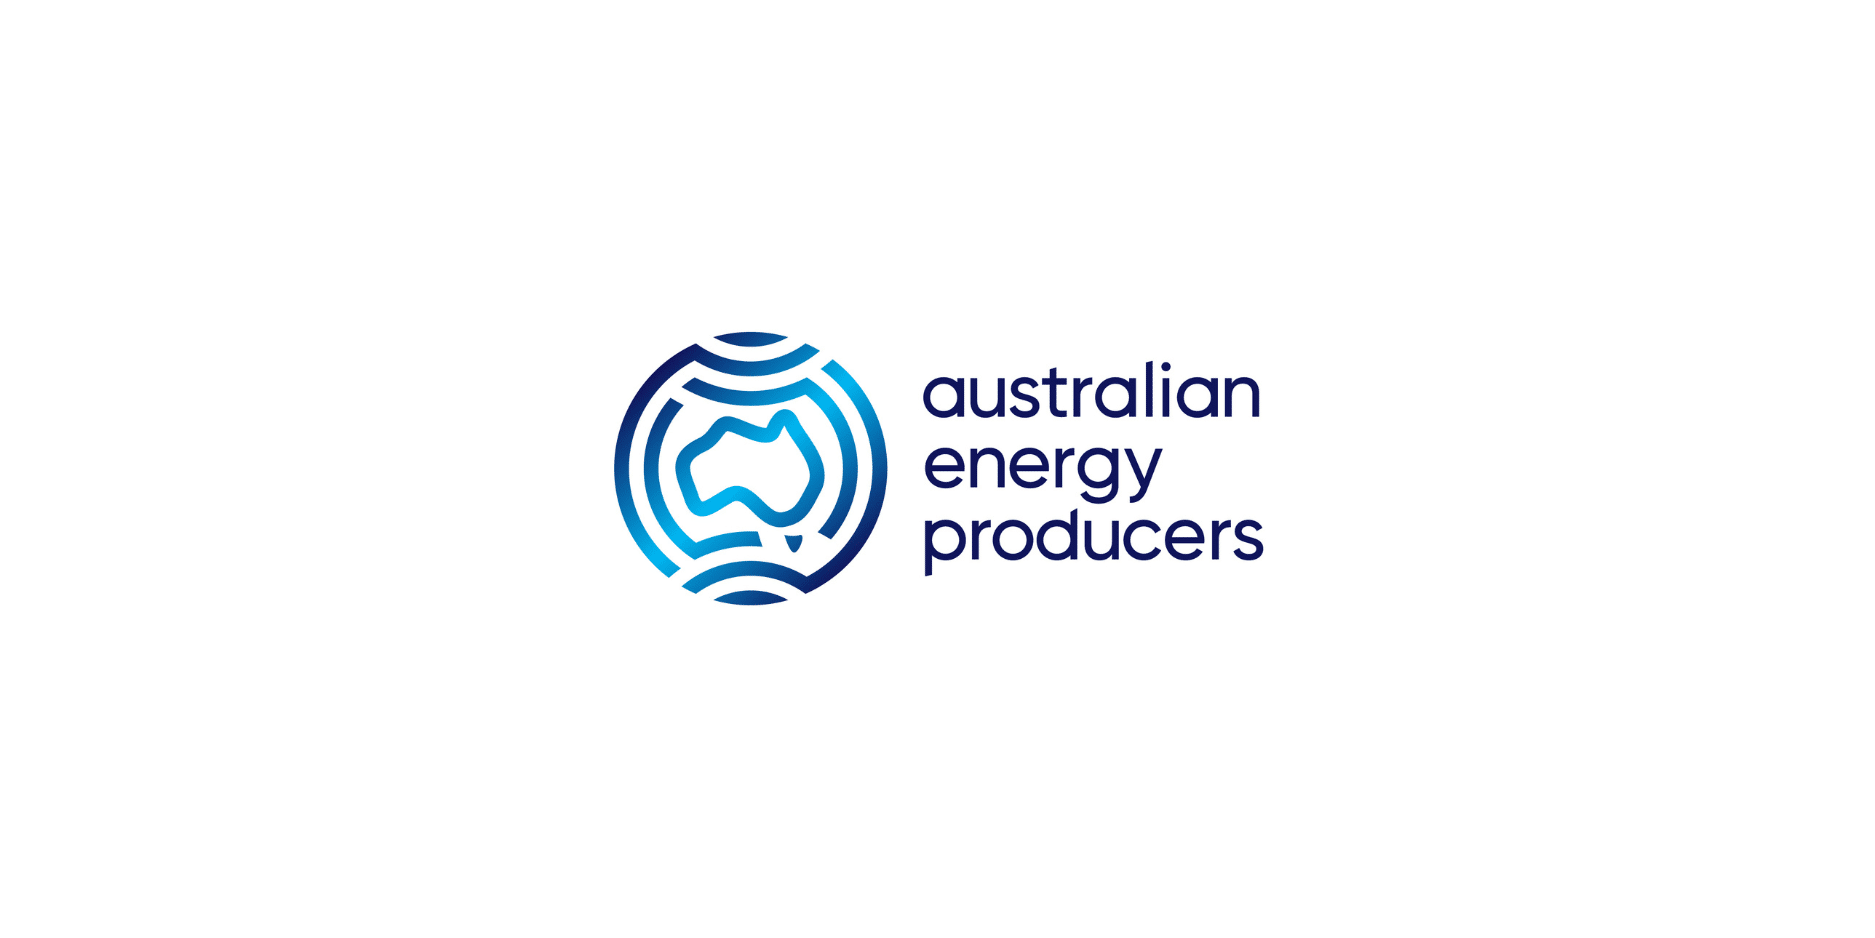 Media Release: Australian Energy Producers revealed as new name for APPEA